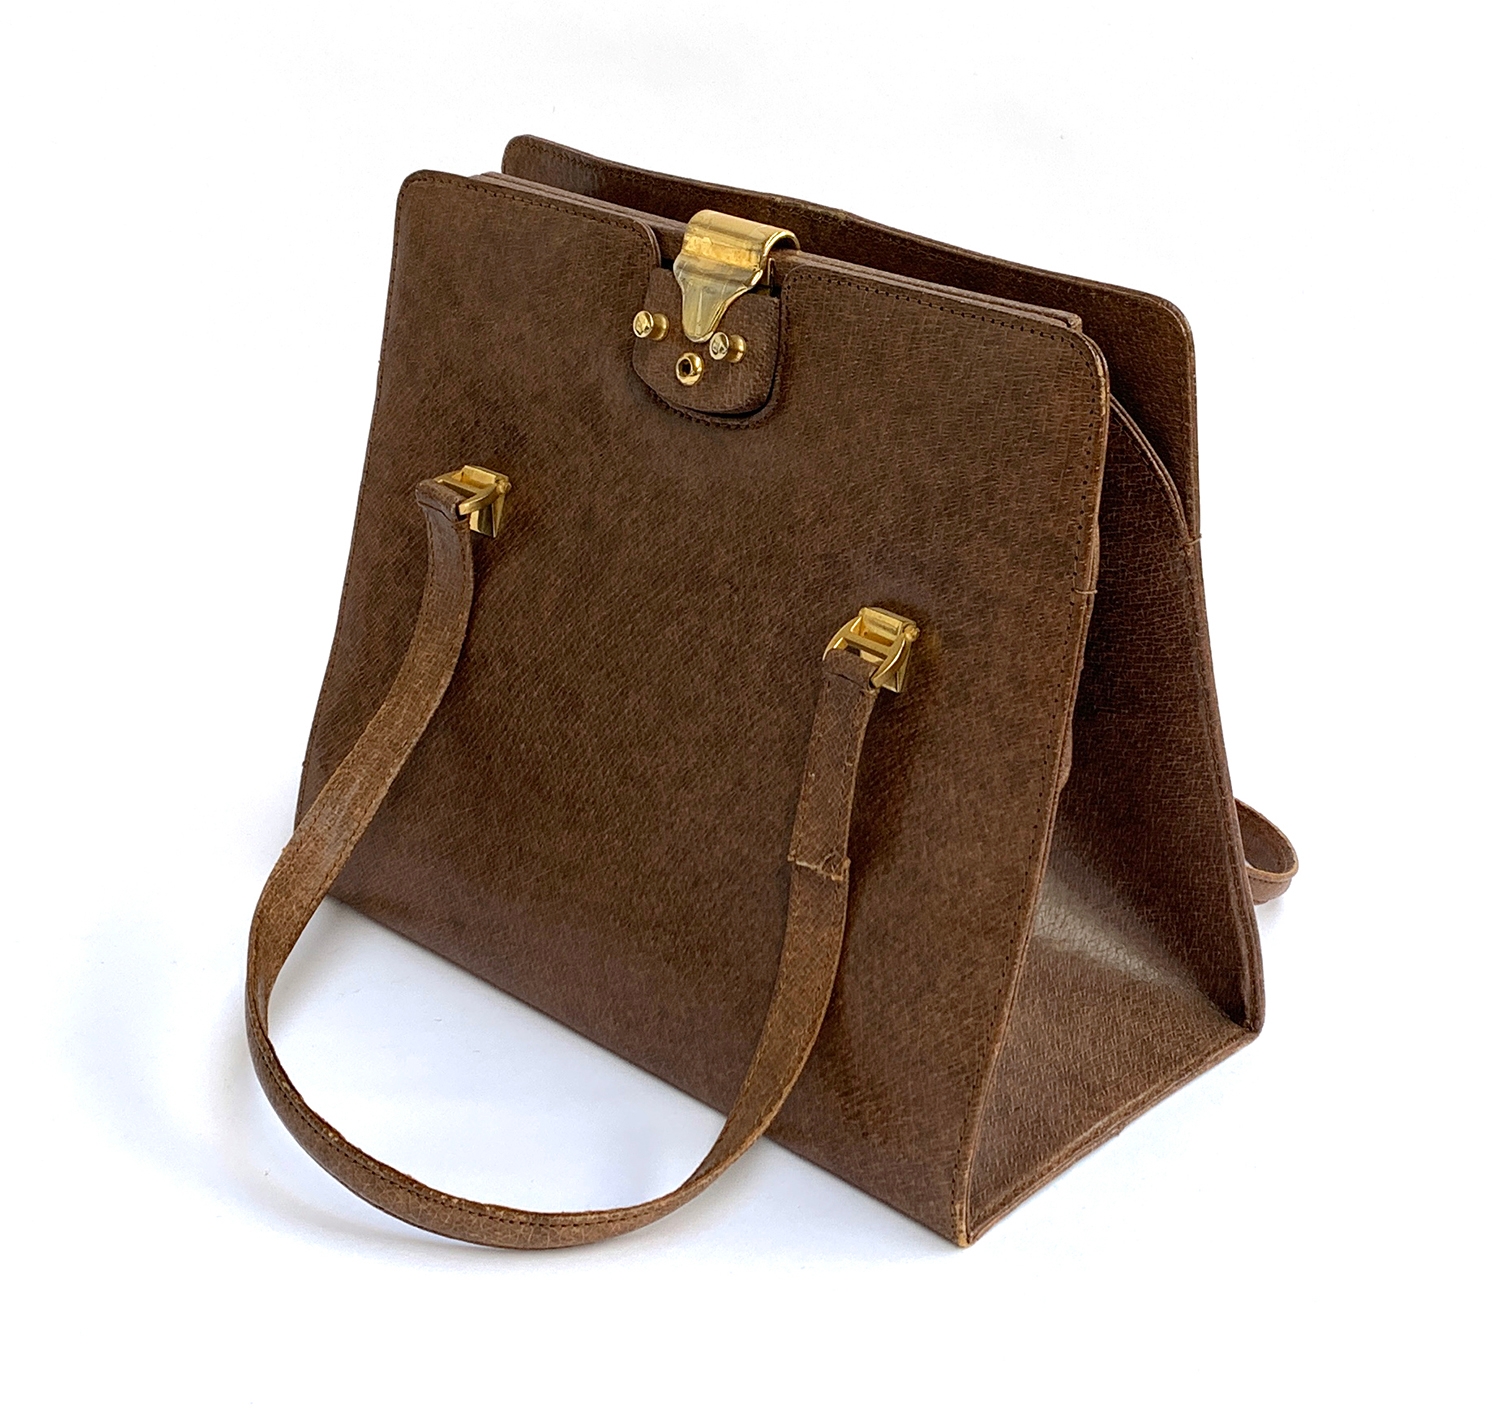 A 1950s brown leather handbag (damage to one strap)